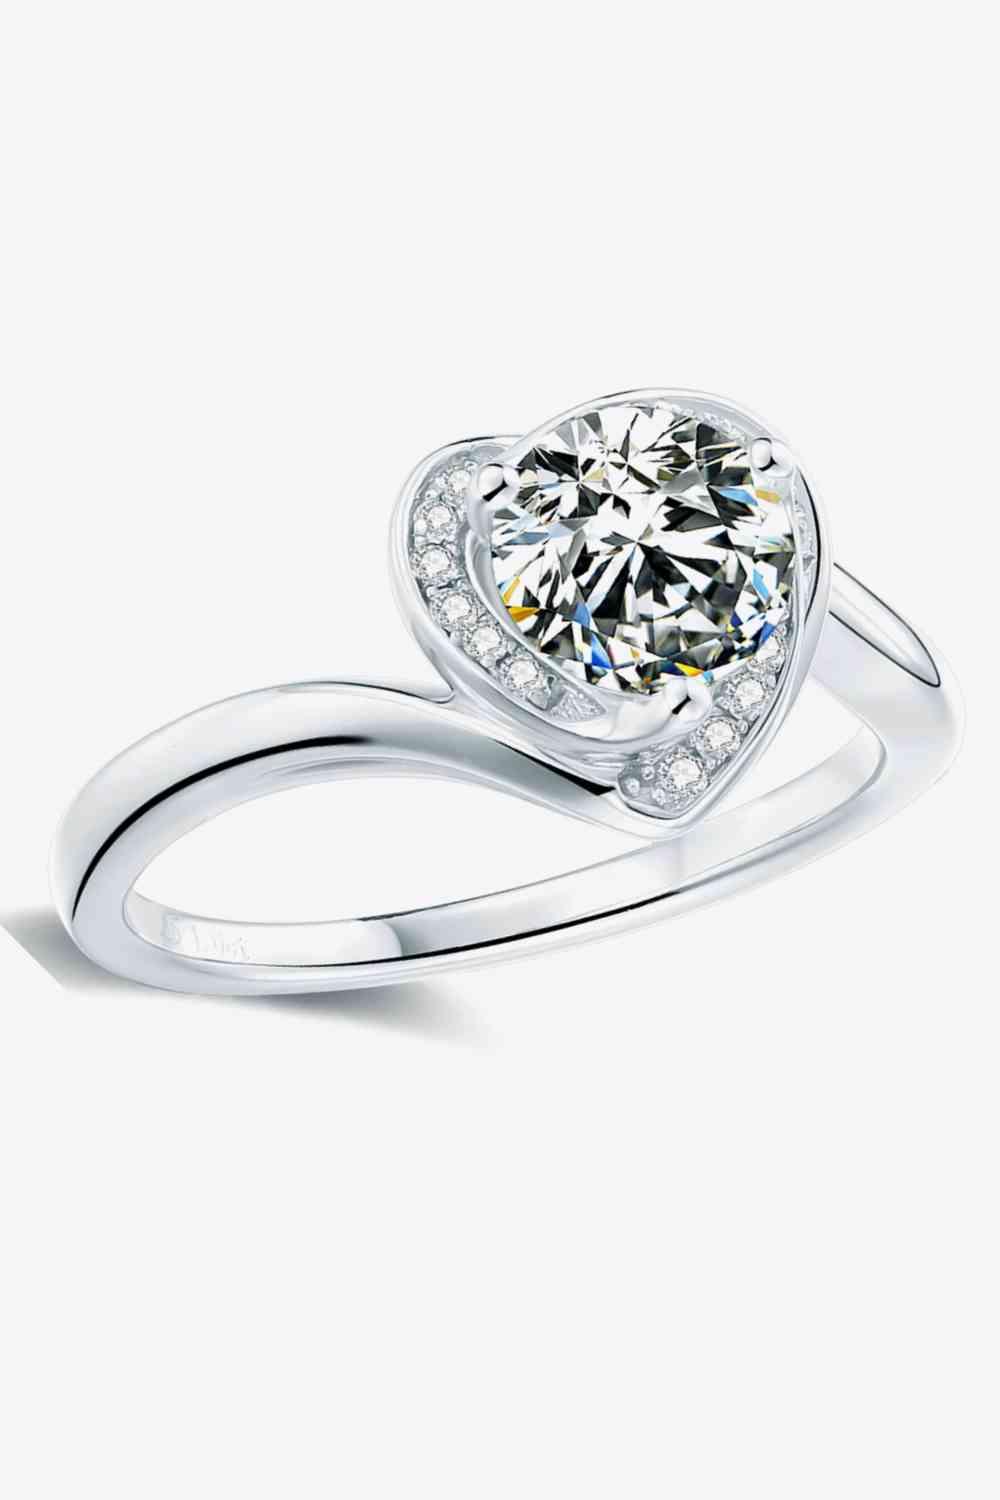 Captivating Hearts 1 Carat Moissanite Sterling Silver Heart Ring - God's Girl Gifts And Apparel